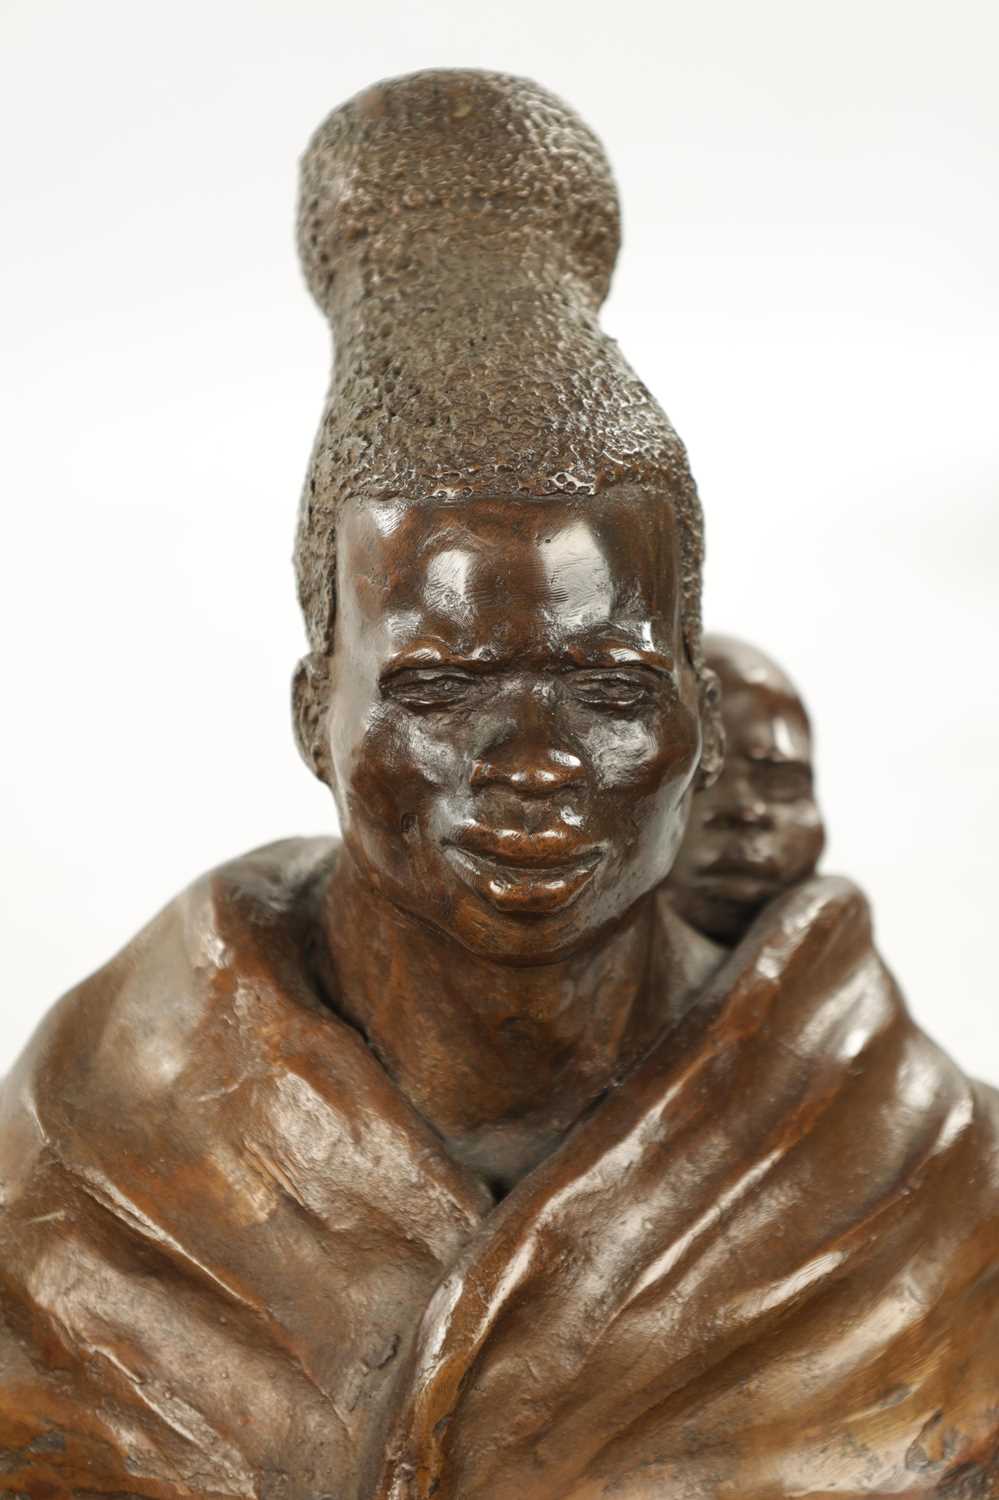 A PAIR OF 20TH CENTURY BRONZE SCULPTURES DEPICTING A ZULU WOMEN AND MAN BY PIERRE VAN RYNEVELD SIGNE - Image 5 of 10